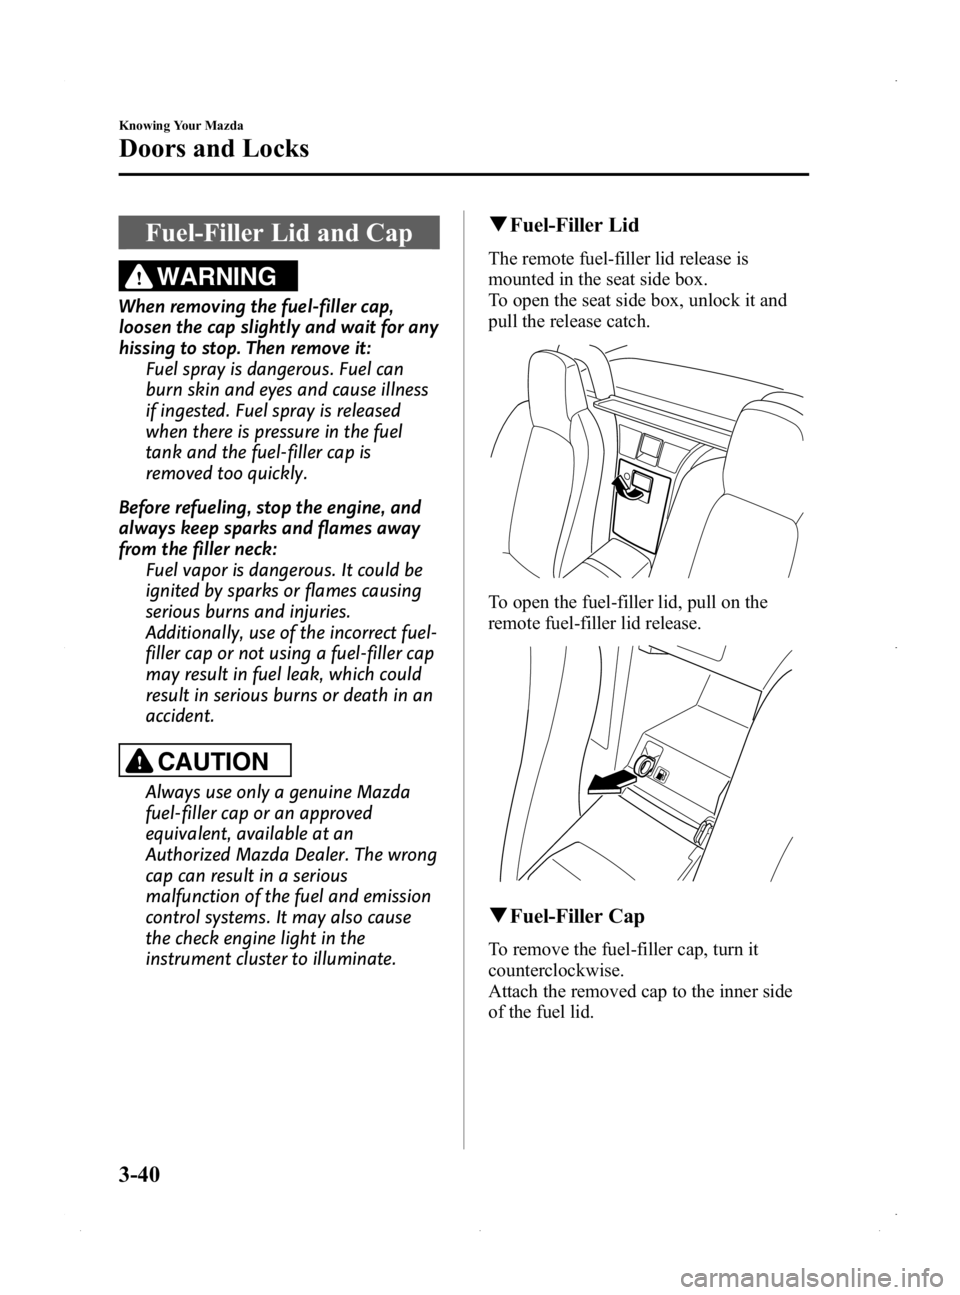 MAZDA MODEL MX-5 MIATA PRHT 2015  Owners Manual Black plate (94,1)
Fuel-Filler Lid and Cap
WARNING
When removing the fuel-filler cap,
loosen the cap slightly and wait for any
hissing to stop. Then remove it:Fuel spray is dangerous. Fuel can
burn sk